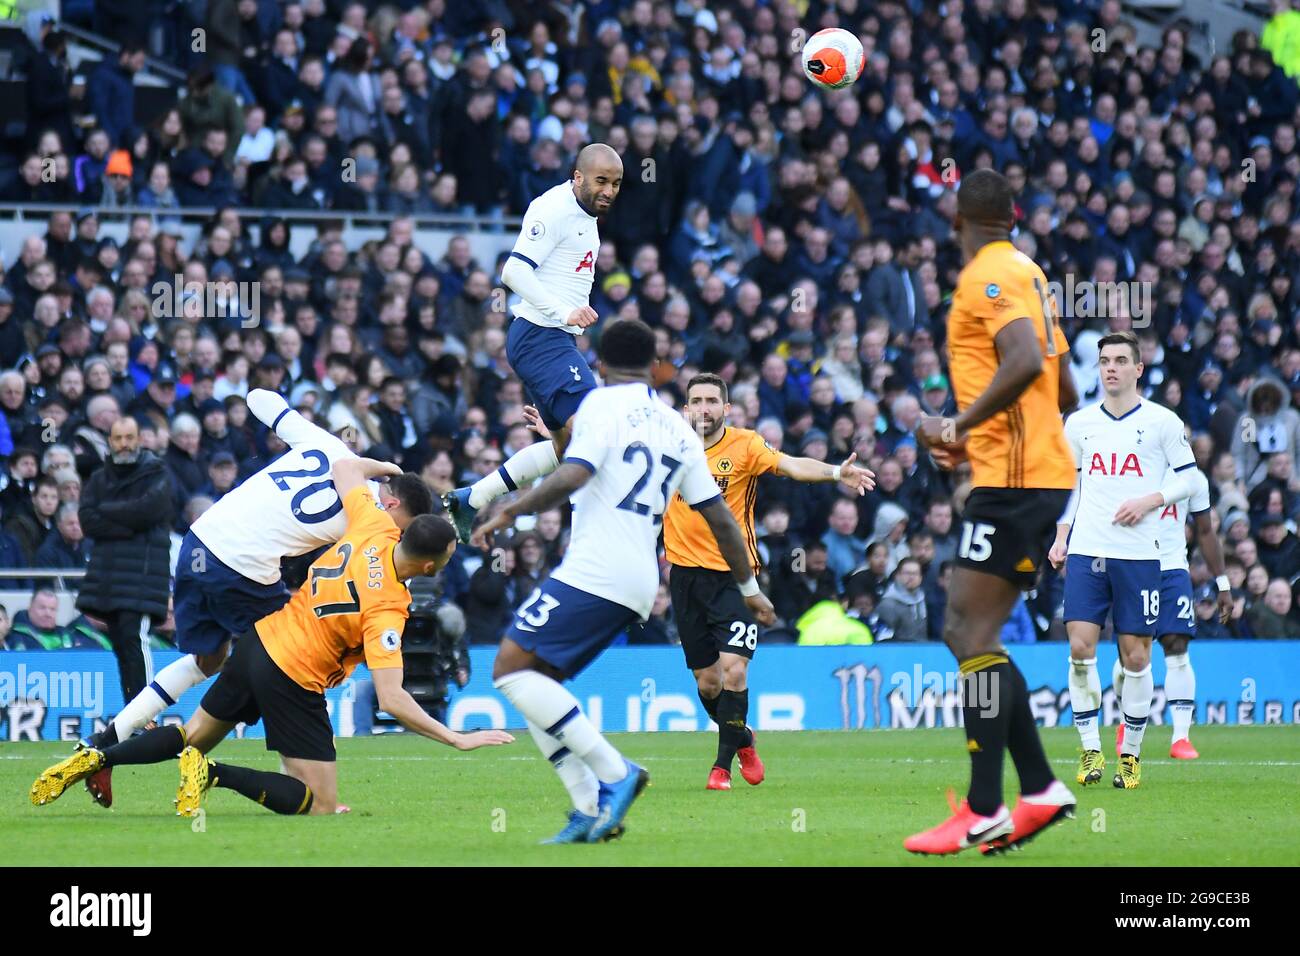 LONDON, ENGLAND - MArch 1, 2020: Lucas Moura of Tottenham pictured during the 2020/21 Premier League game between Tottenham Hotspur FC and Wolverhampton FC at Tottenham Hotspur Stadium. Stock Photo